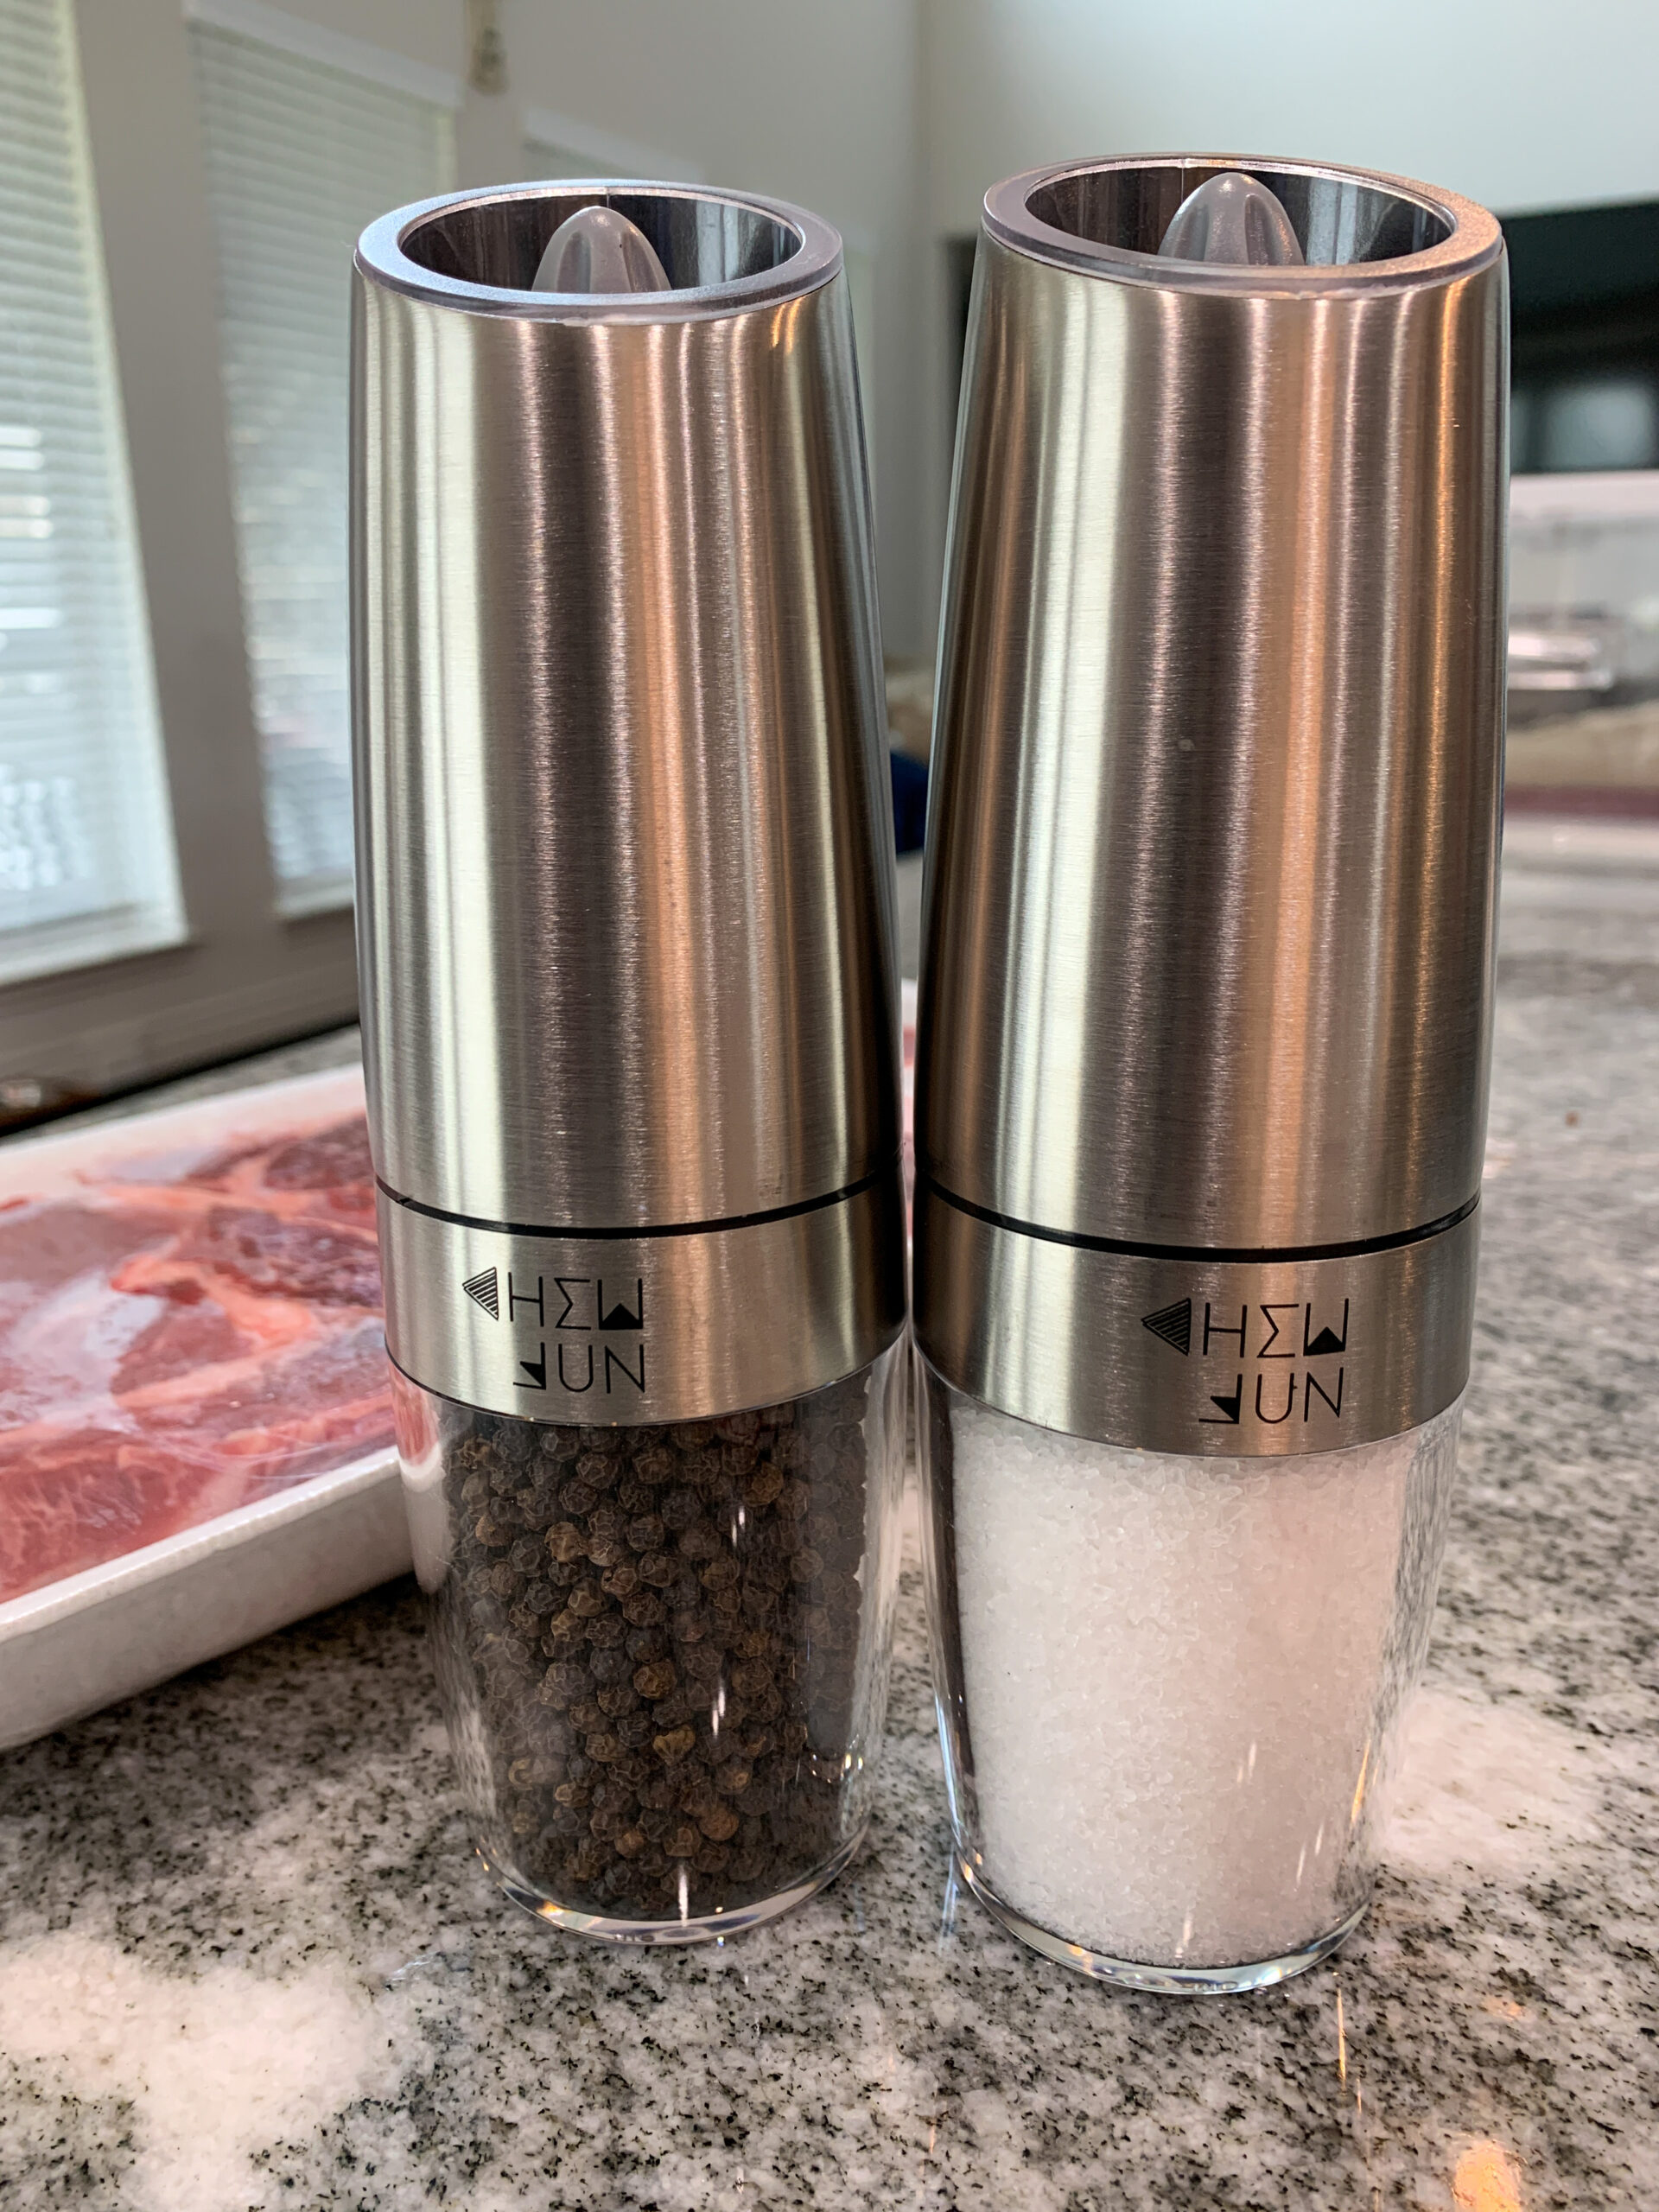 Has anyone used a Su-VGun by GrillBlazer? If yes whats your opinion :  r/sousvide